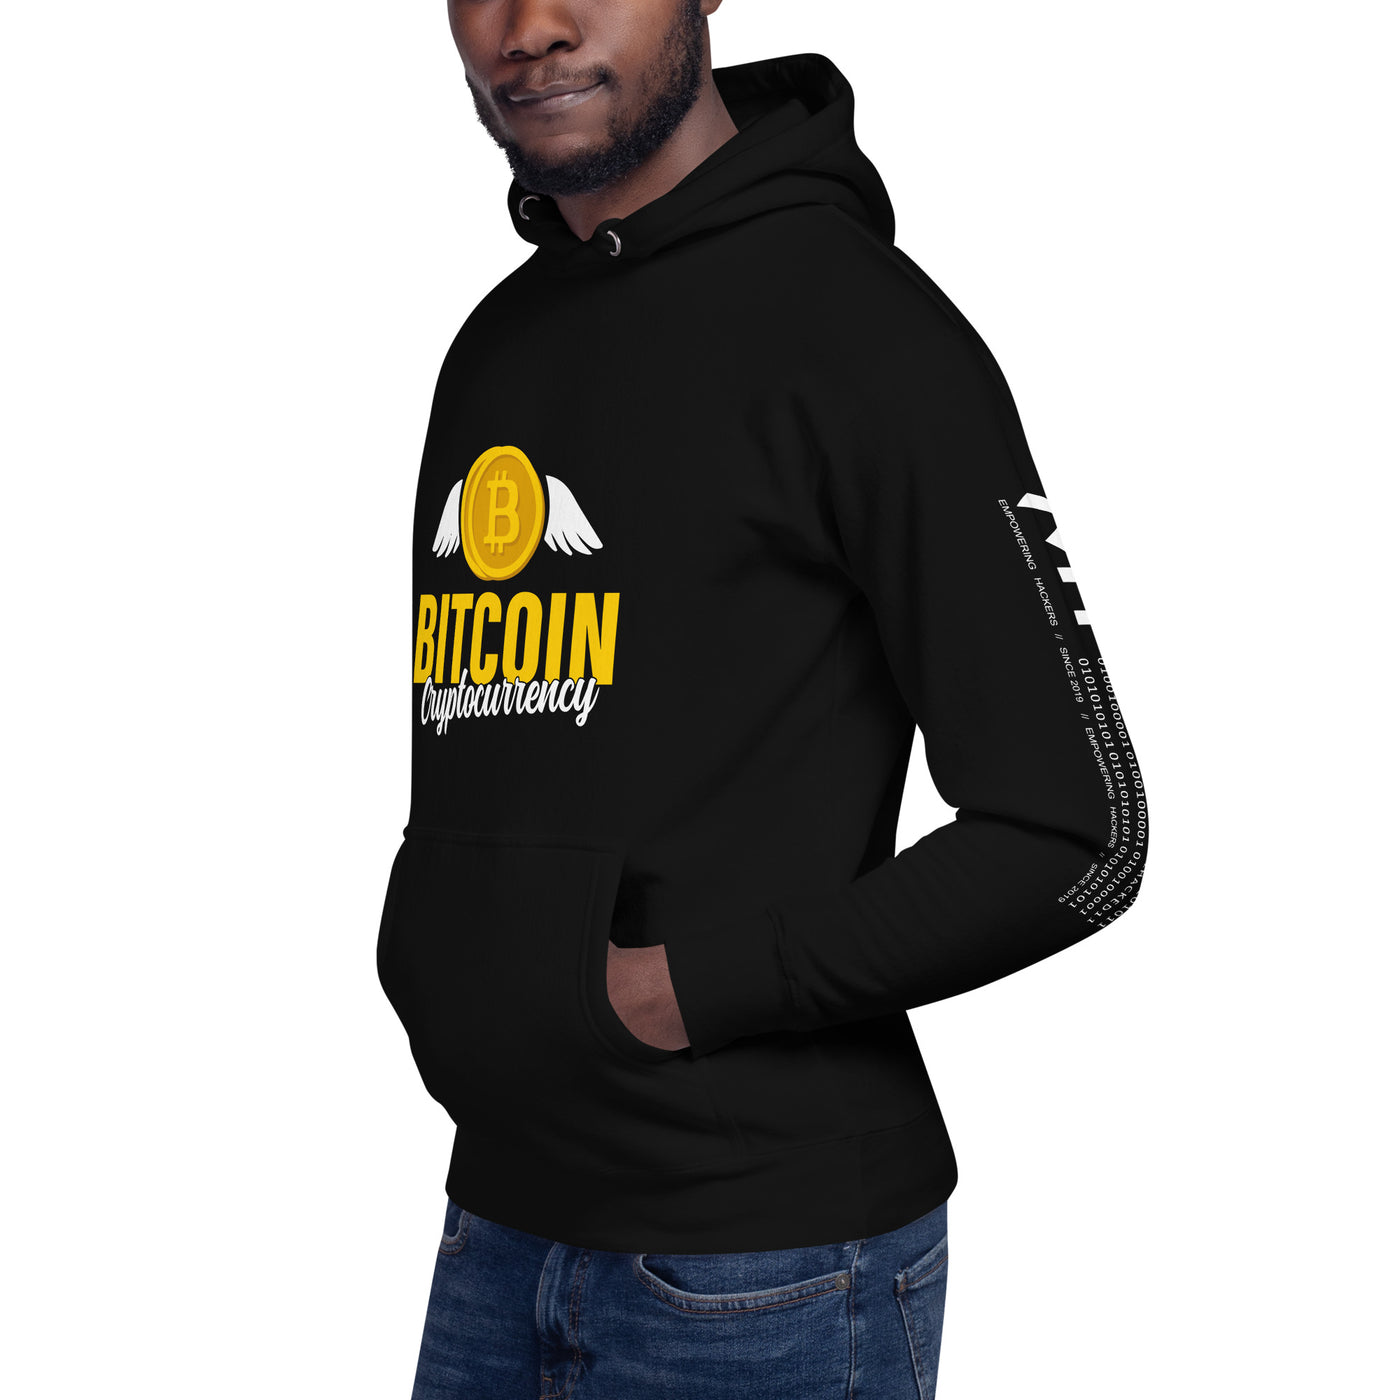 Bitcoin Cryptocurrency - Unisex Hoodie